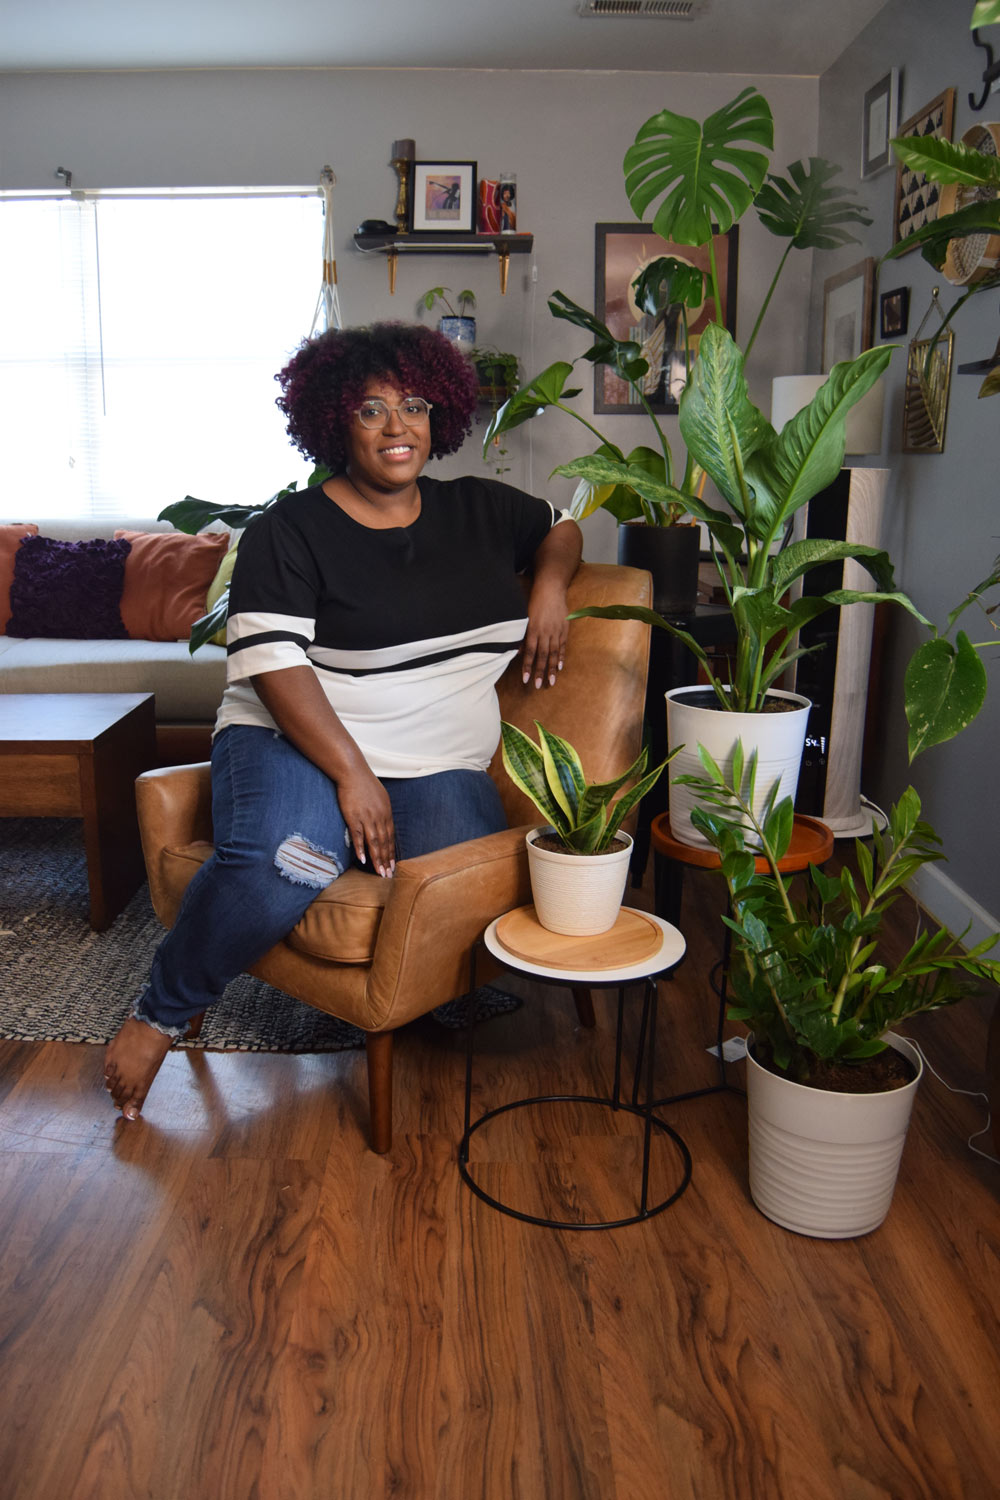 A woman sitting in a chair surrounded by plants in a living room.